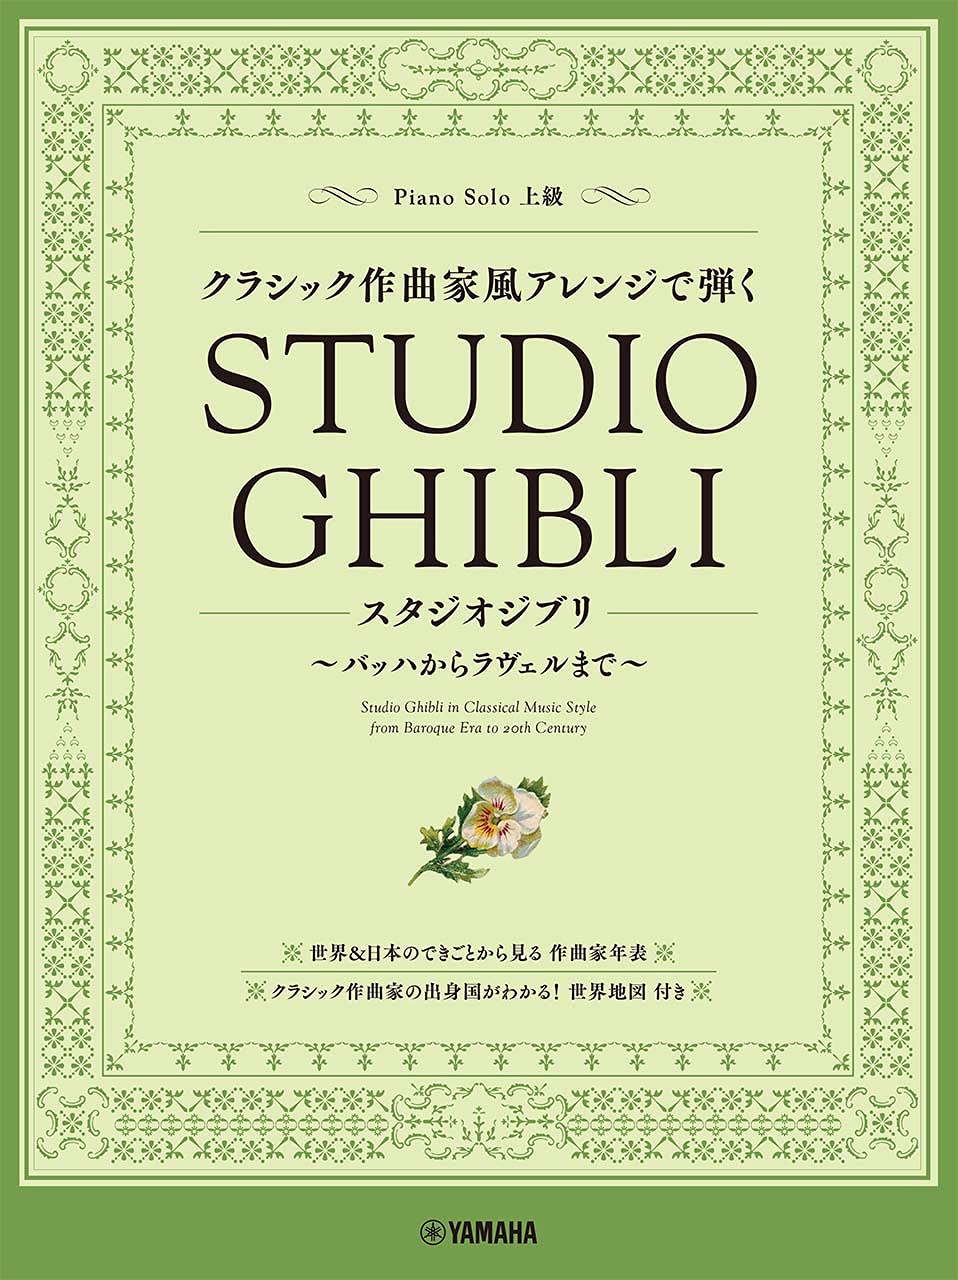 Studio Ghibli in Classical Music Styles (Baroque - 20th Century) for Piano